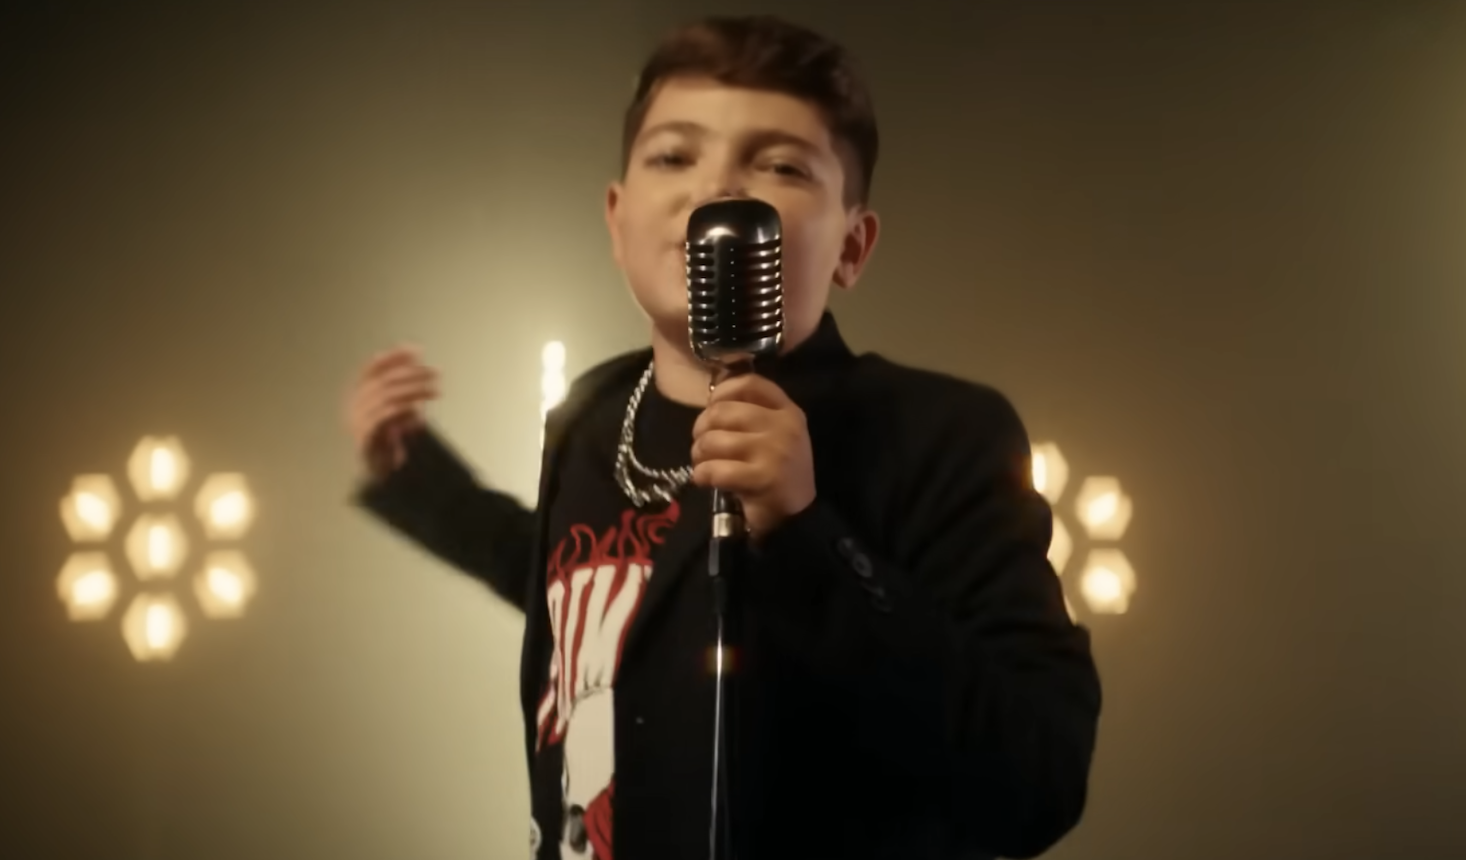 Eurovision Junior: All about Lisandro, this 13-year-old Frenchman who won the 20th edition